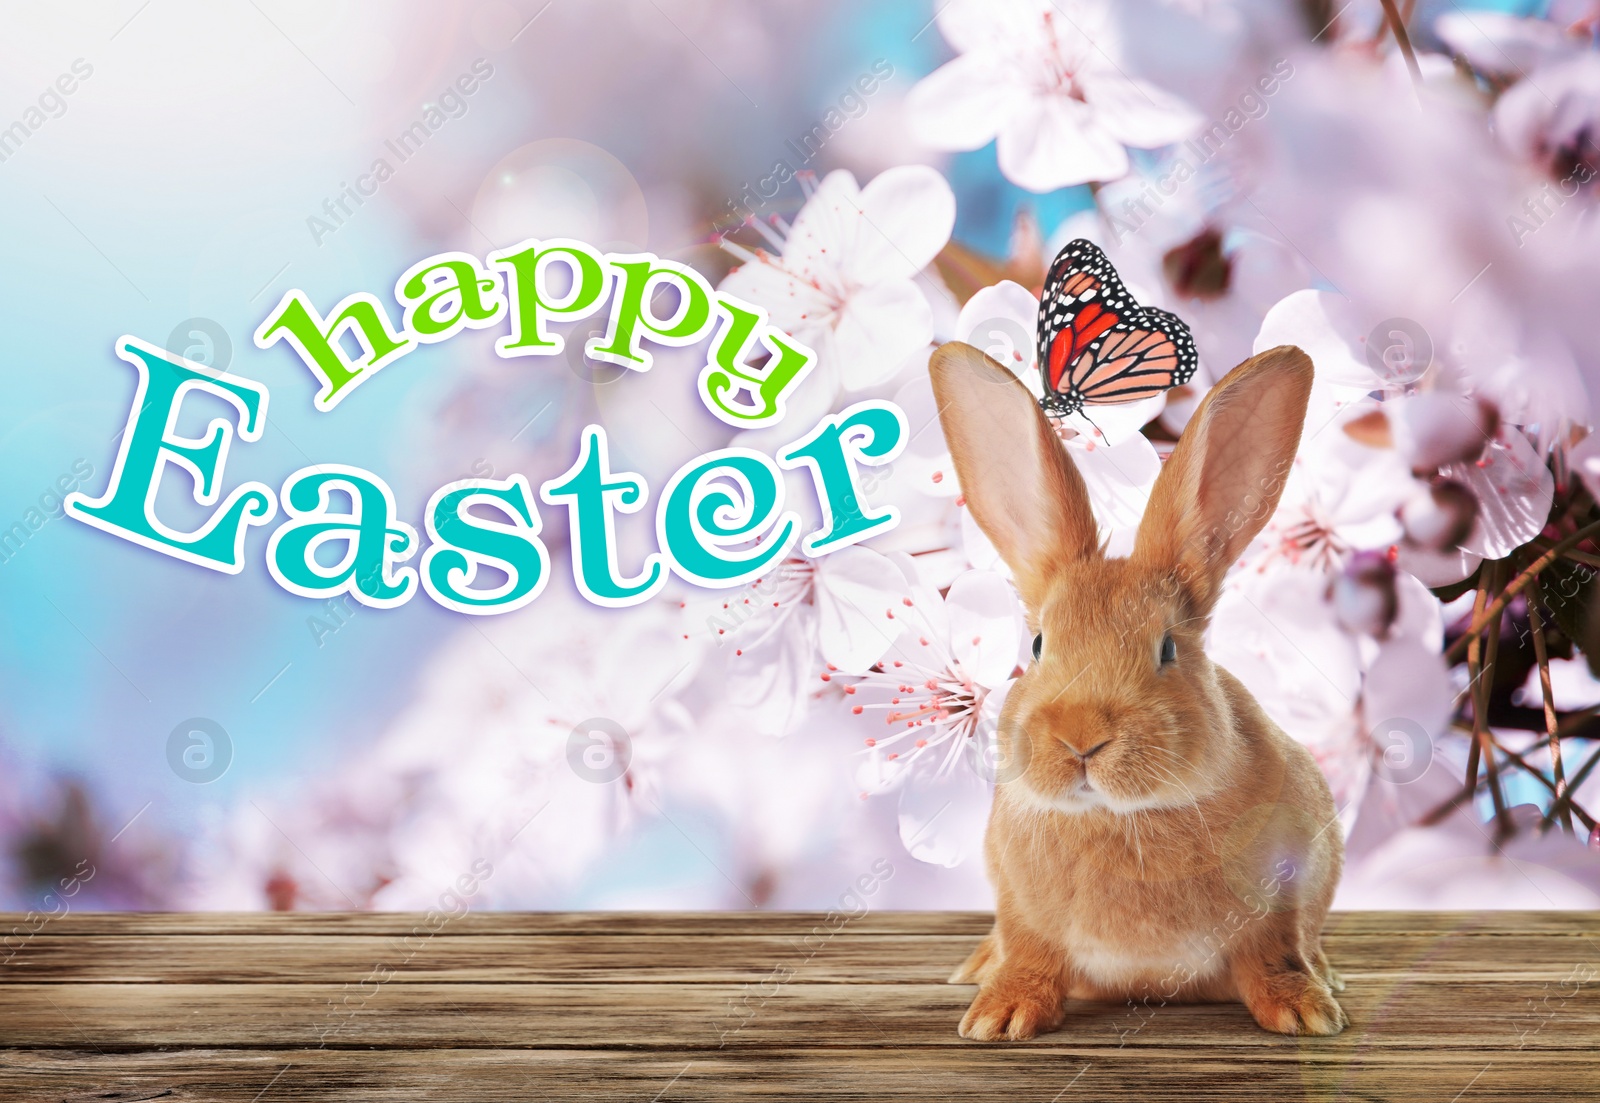 Image of Happy Easter. Adorable bunny on wooden table outdoors